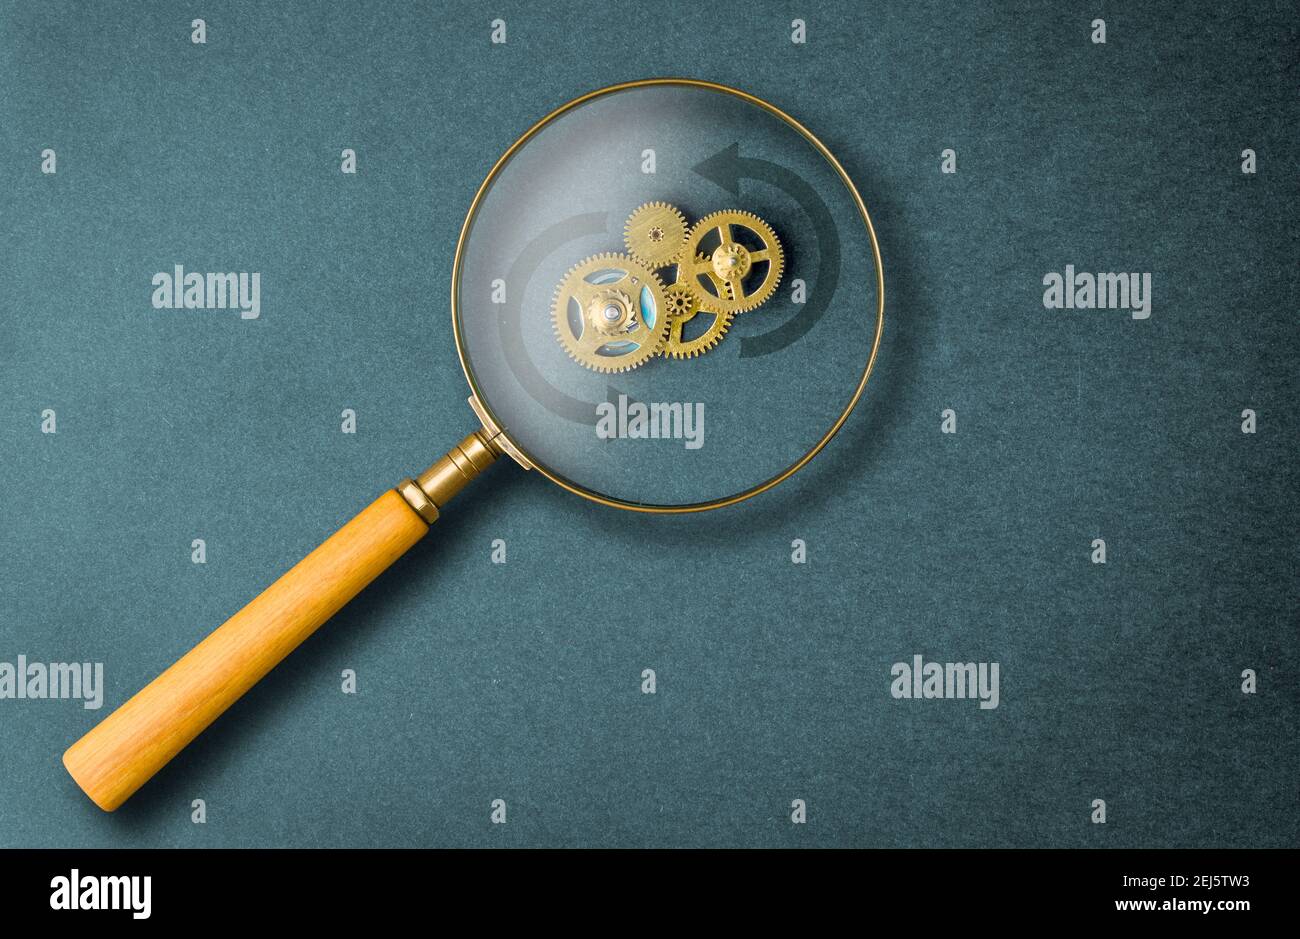 Concept, search mechanism. Illustrated by a gear mechanism seen thru a magnifier. Stock Photo